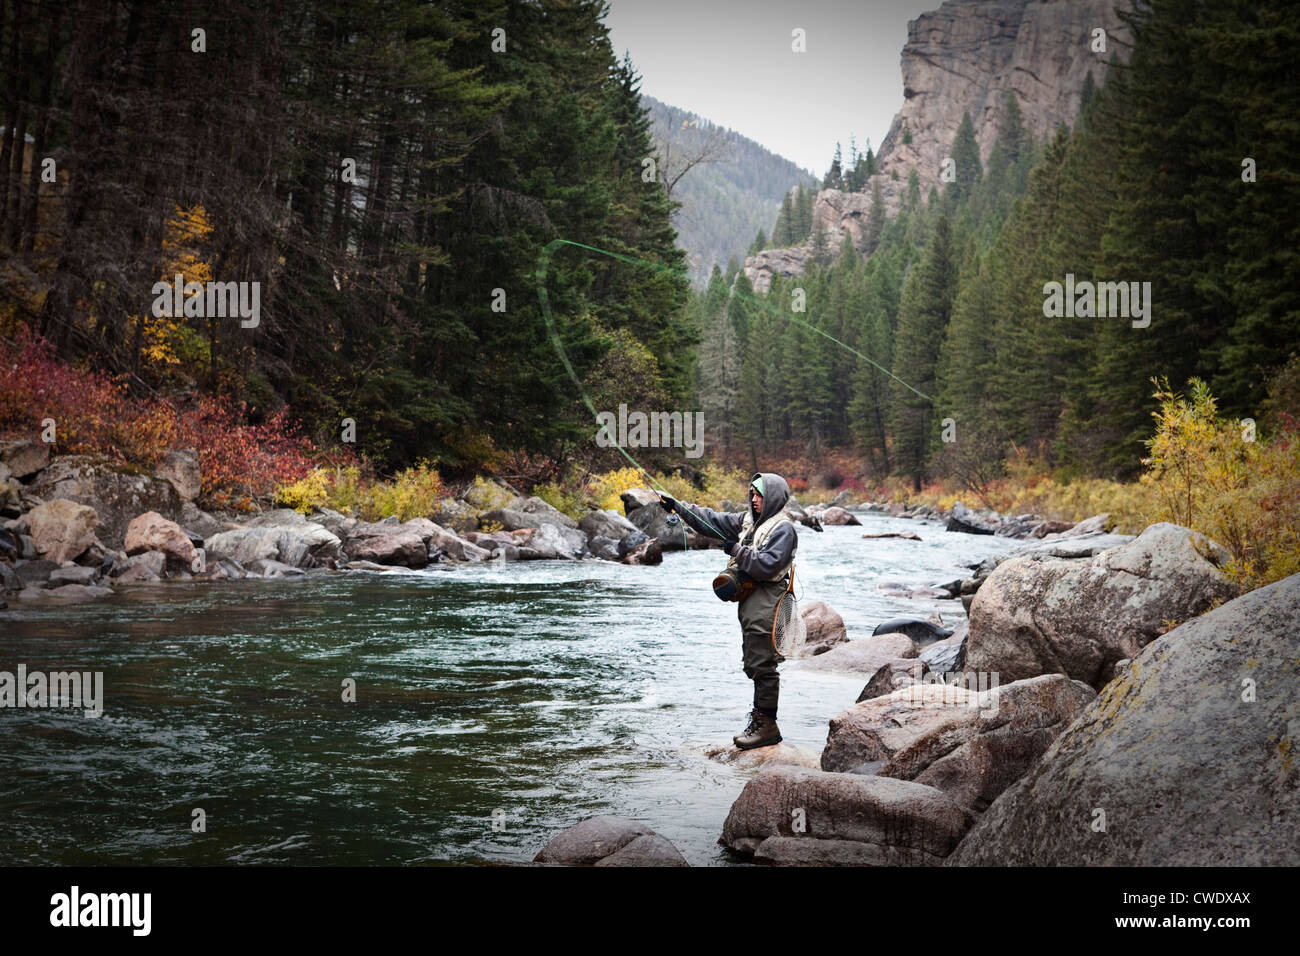 A athletic man fly fishing stands on the banks a river surrounded with the fall colors in Montana. Stock Photo